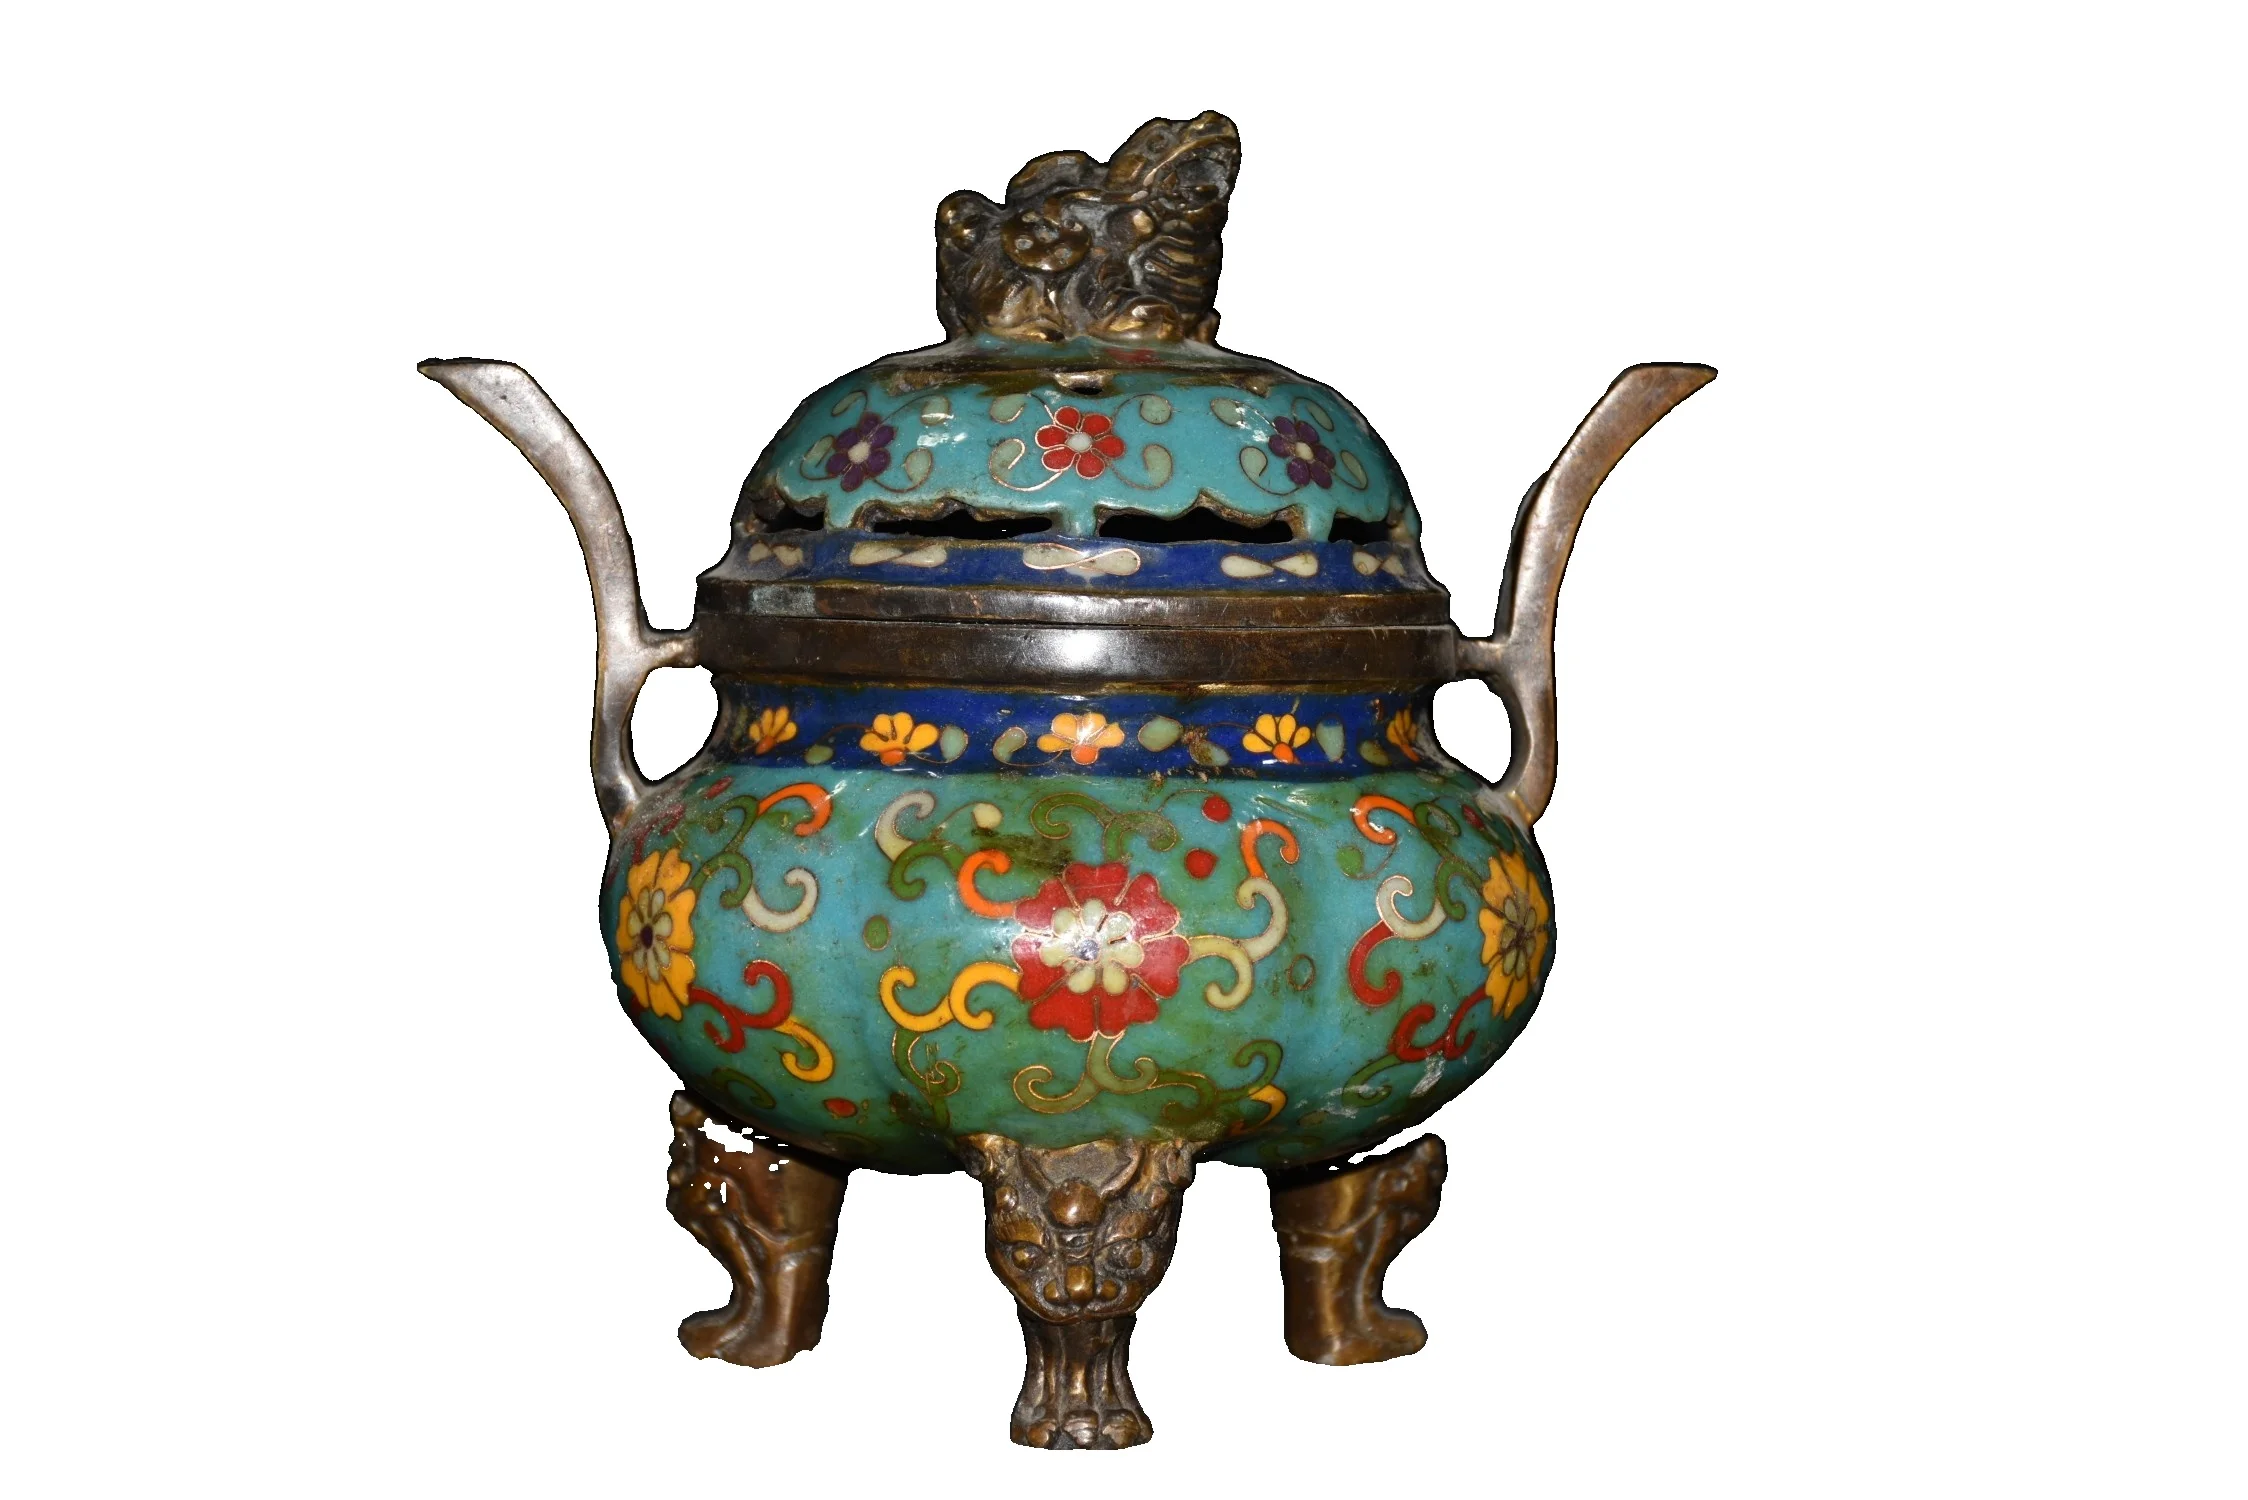 

LAOJUNLU A Pure Copper Cloisonné Filigree Amphora And Three-Legged Incense Burner Chinese Traditional Style Antiques Fine Art